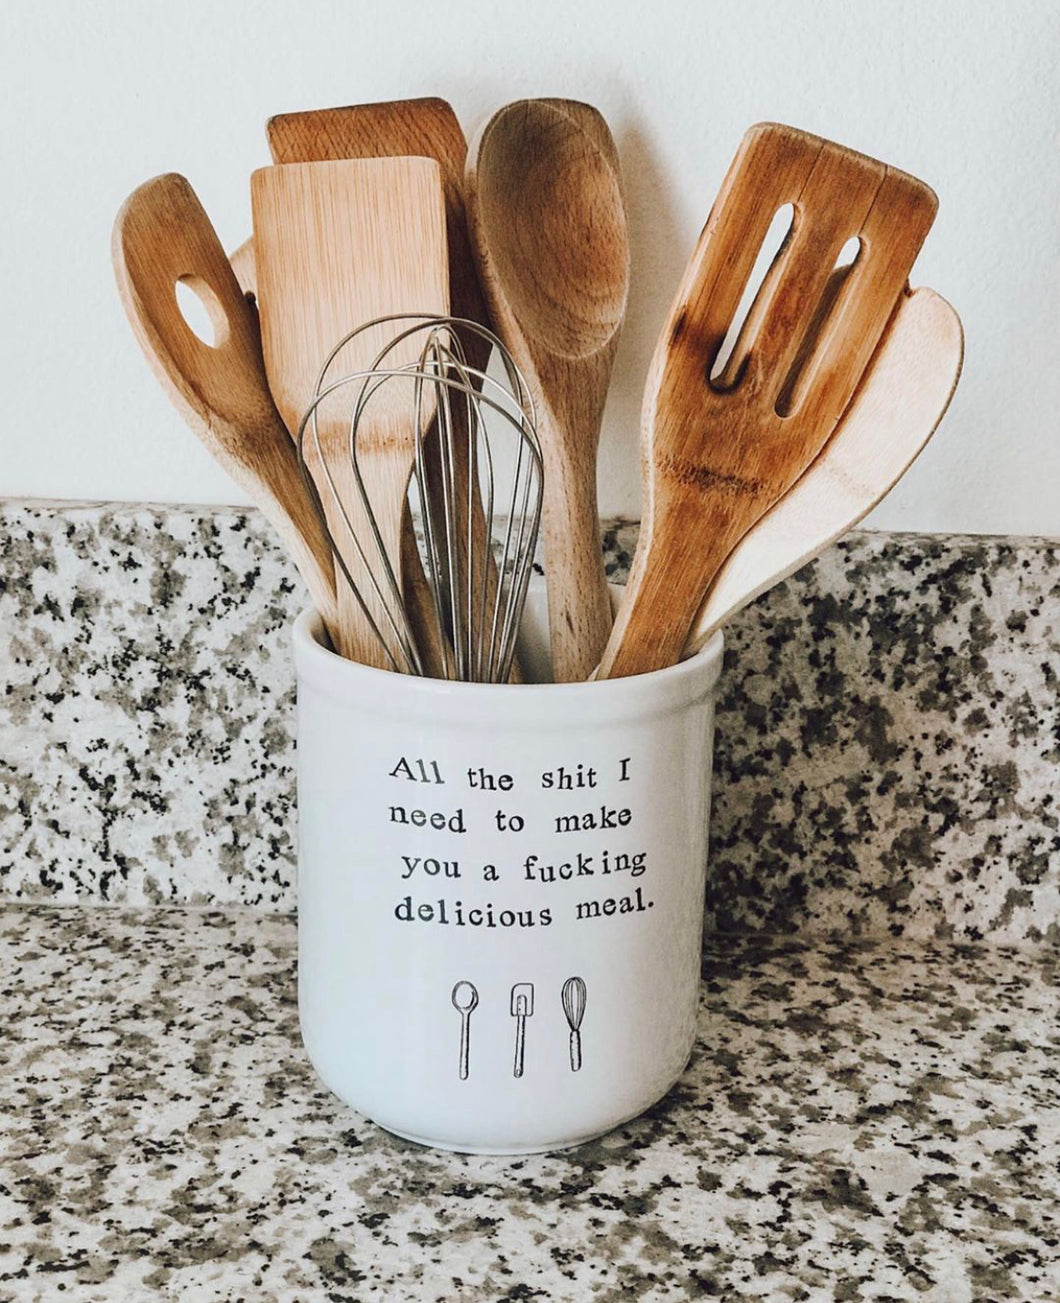 All the Sh!t I Need to Make You A Delicious Meal Ceramic Utensil